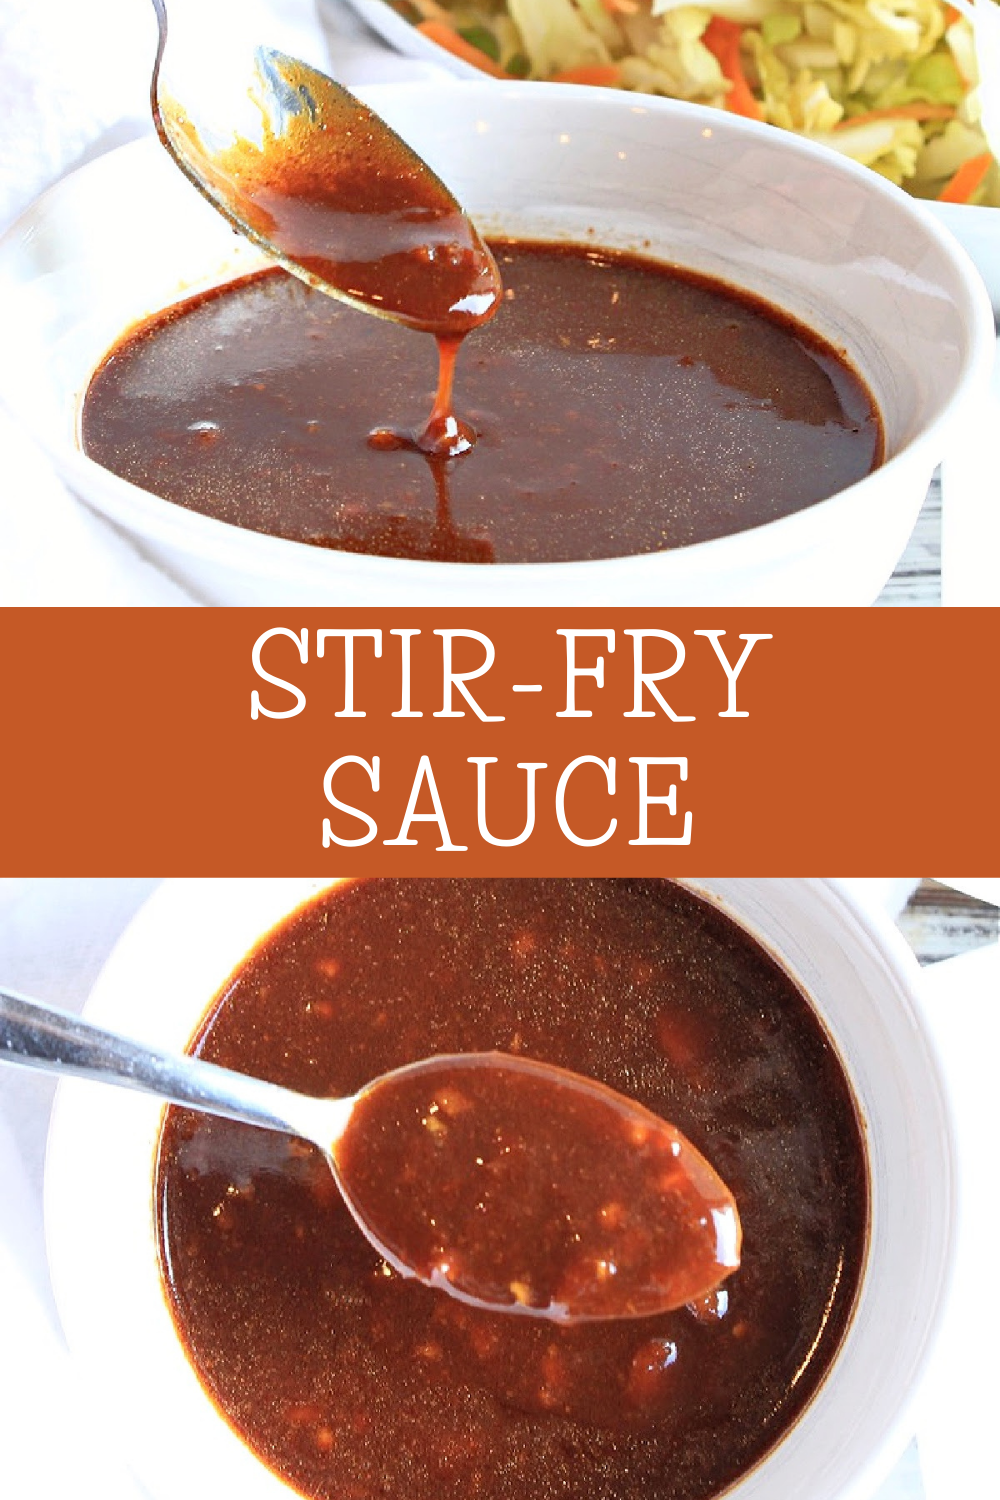 Stir Fry Sauce ~ Garlic and ginger stir fry sauce adds robust flavor to all your stir-fried dinners! Ready in 5 minutes or less! via @thiswifecooks